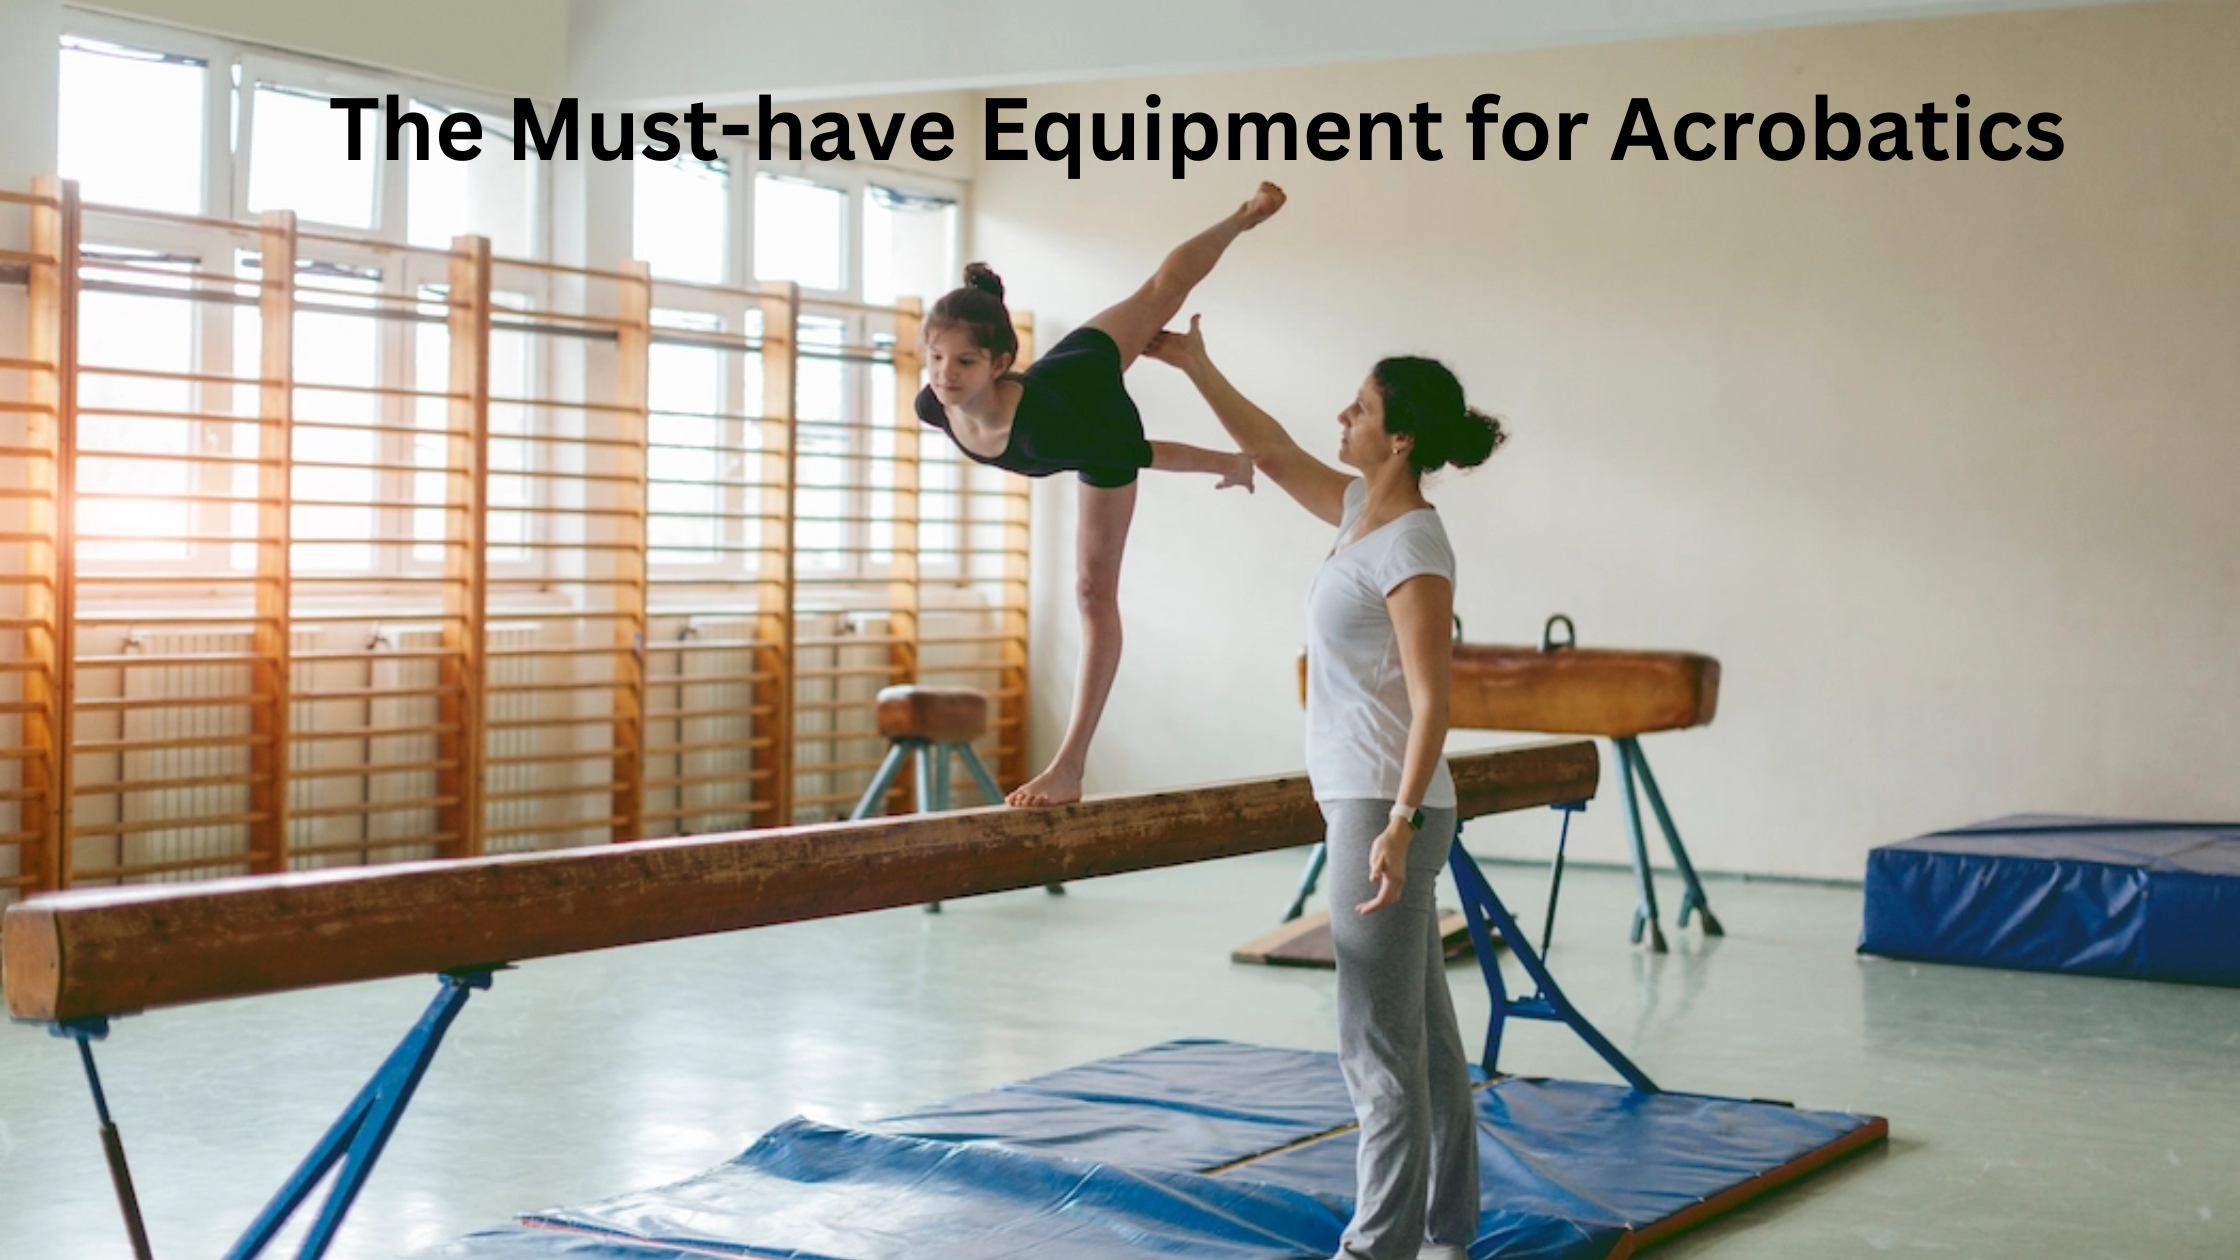 The Must-have Equipment for Acrobatics